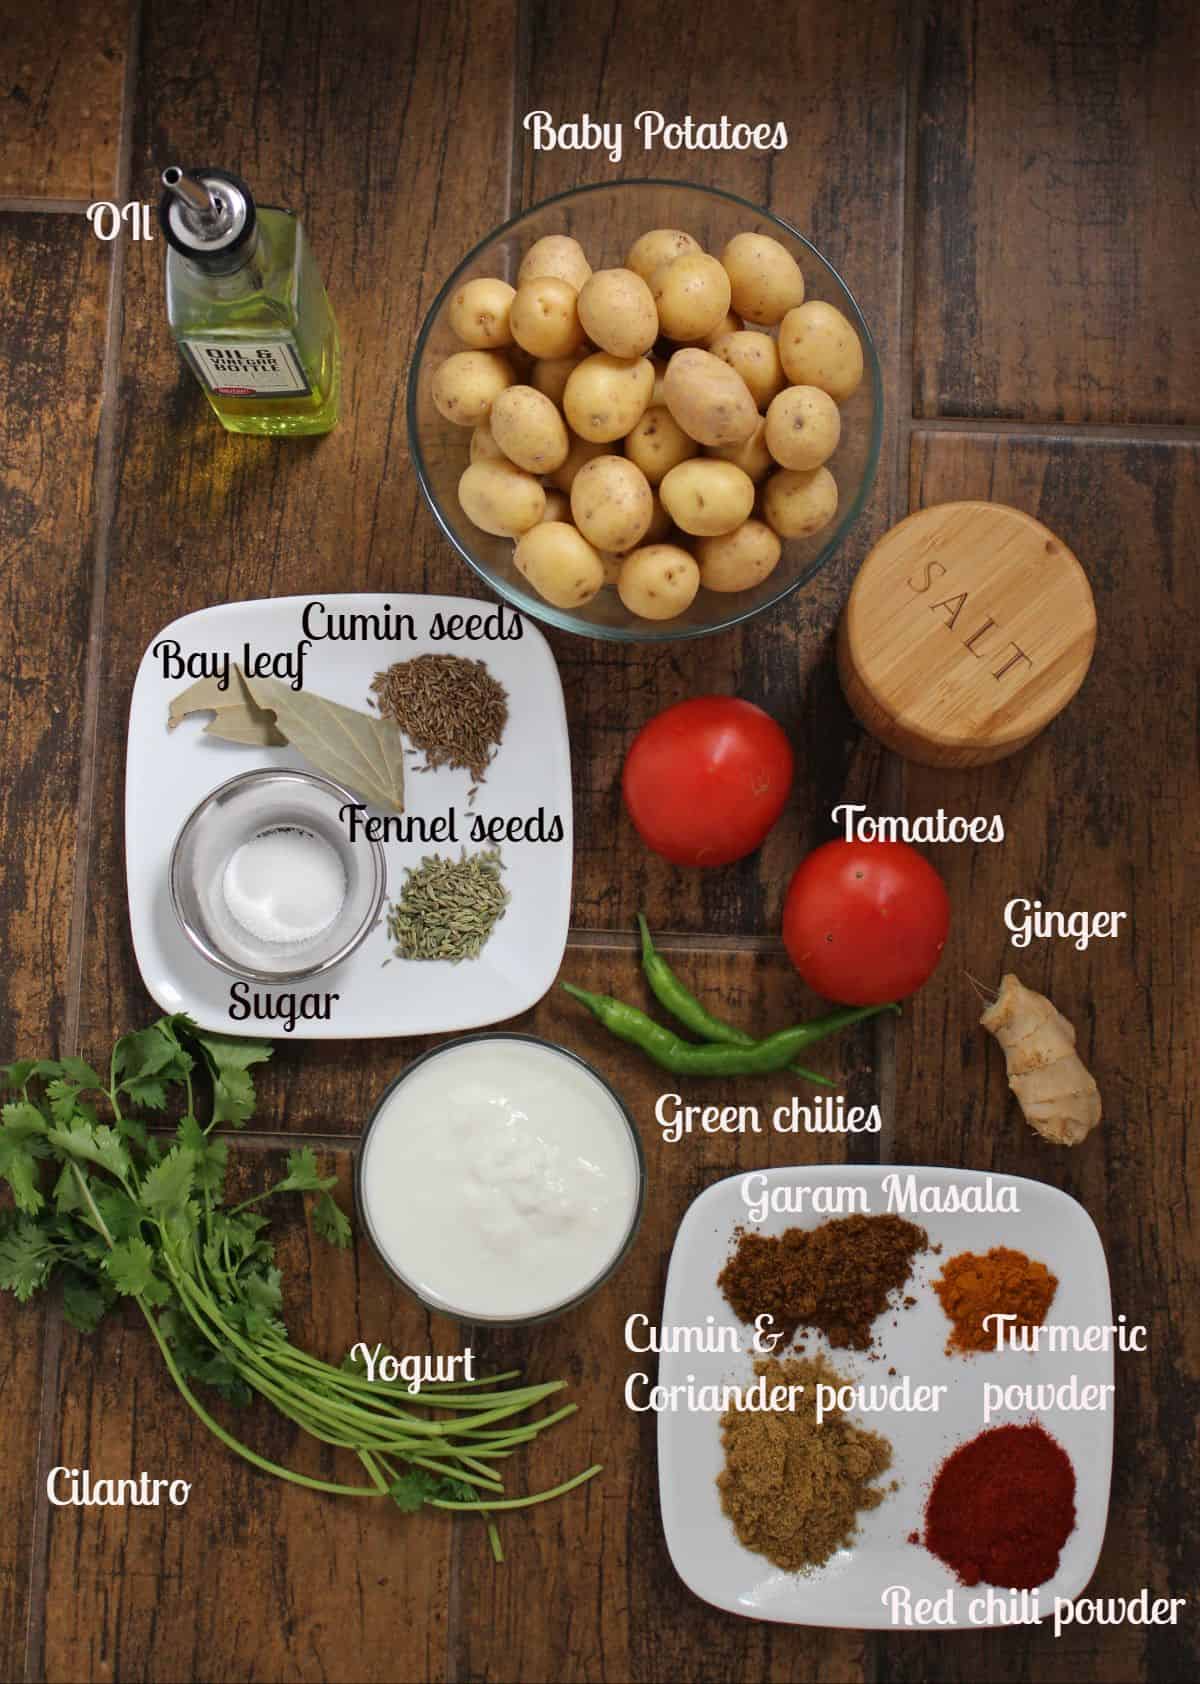 Ingredients laid out and labeled to make Dum aloo recipe